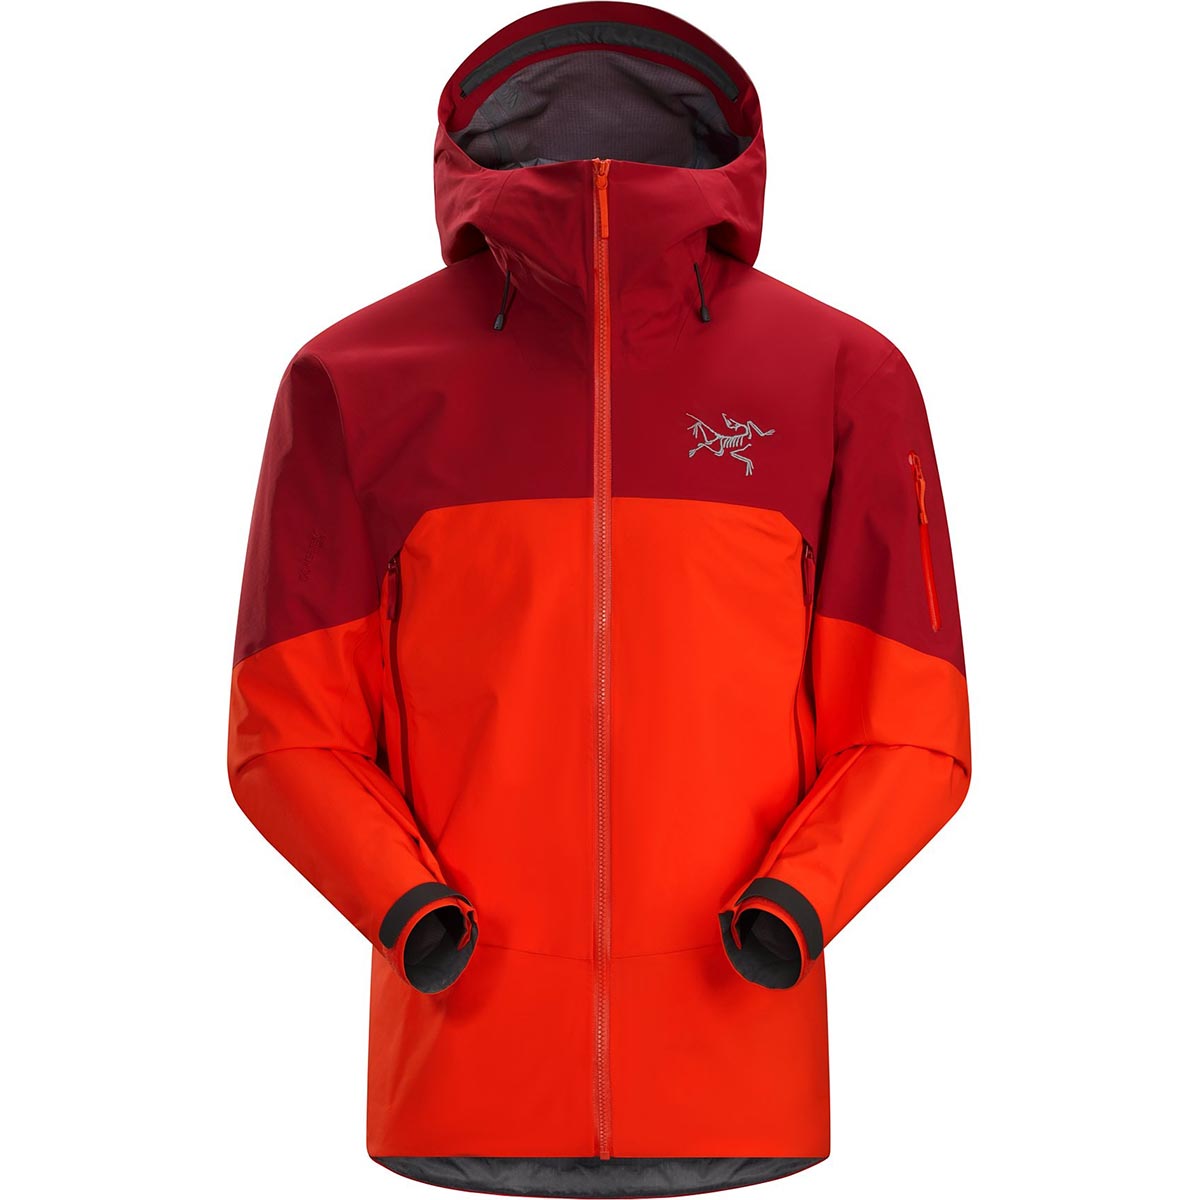 Arc'teryx Rush Jacket, men's, discontinued Fall 2018 colors (free ...